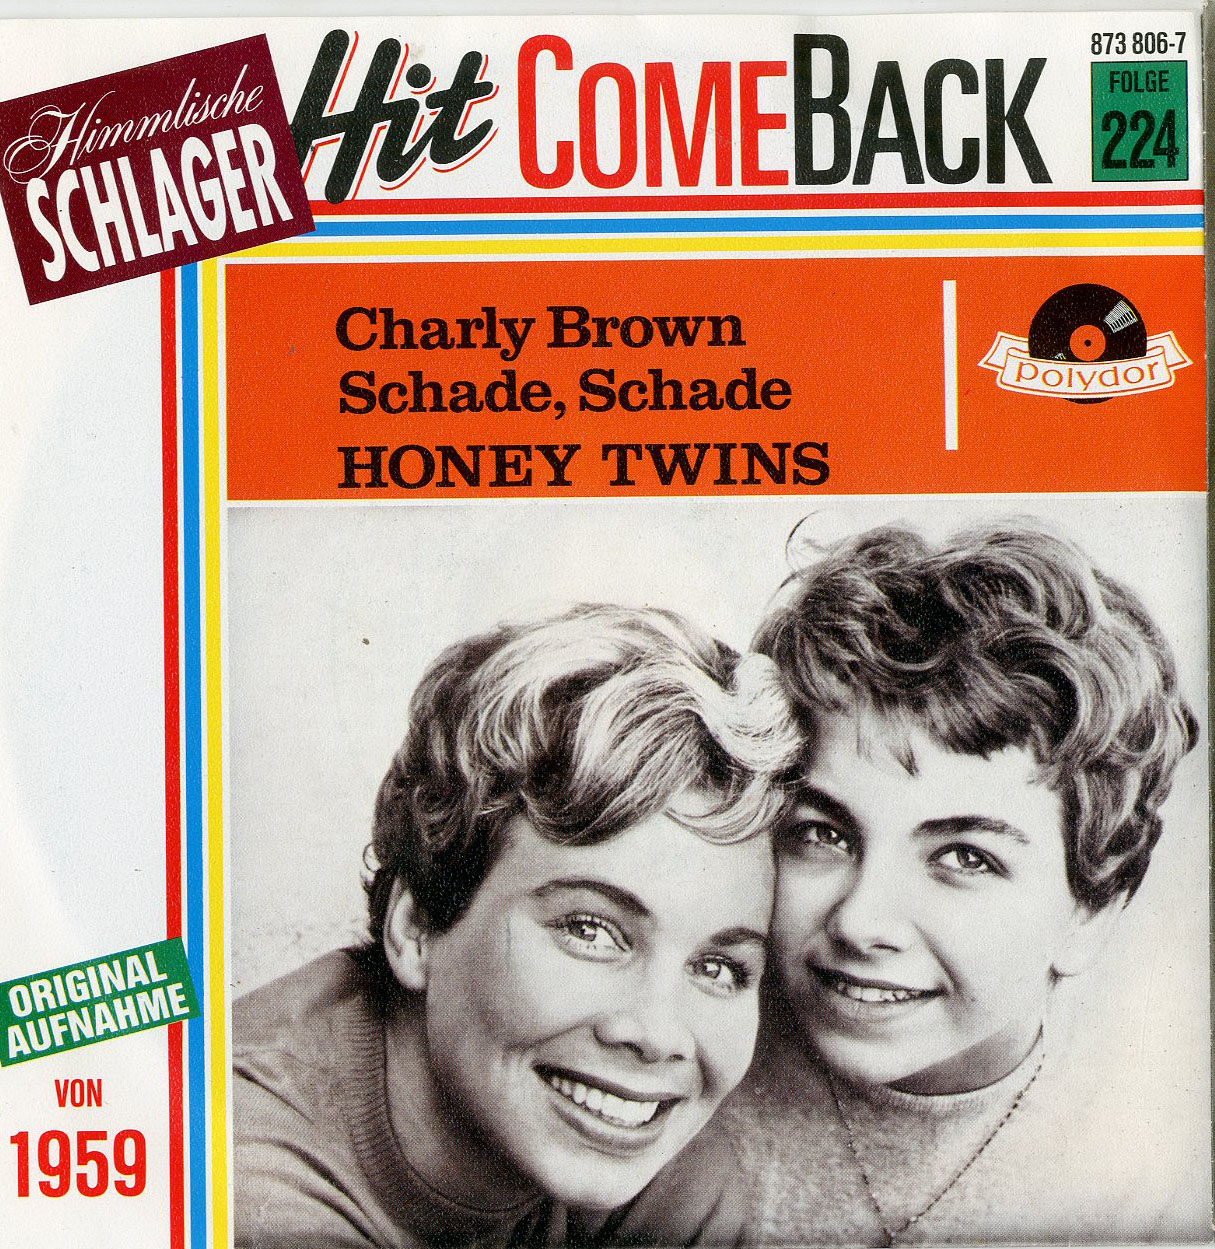 Albumcover Honey Twins - Charly Brown / Schade, schade (Hit Comeback Folge 224)